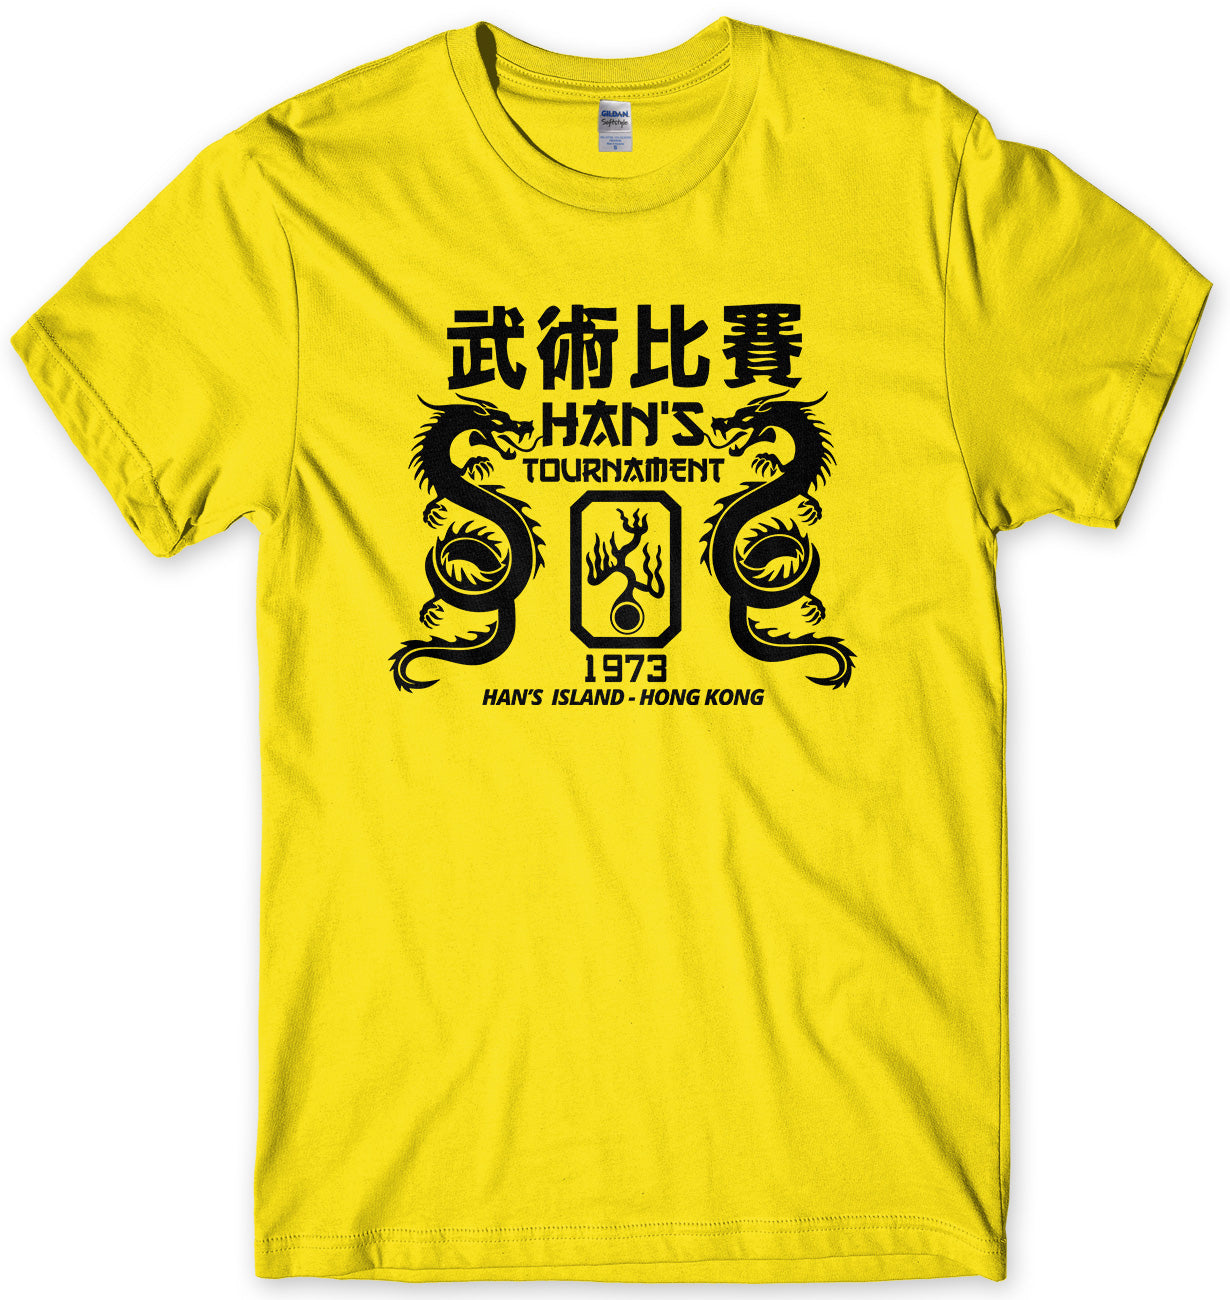 HAN'S TOURNAMENT - INSPIRED BY ENTER THE DRAGON MENS UNISEX T-SHIRT